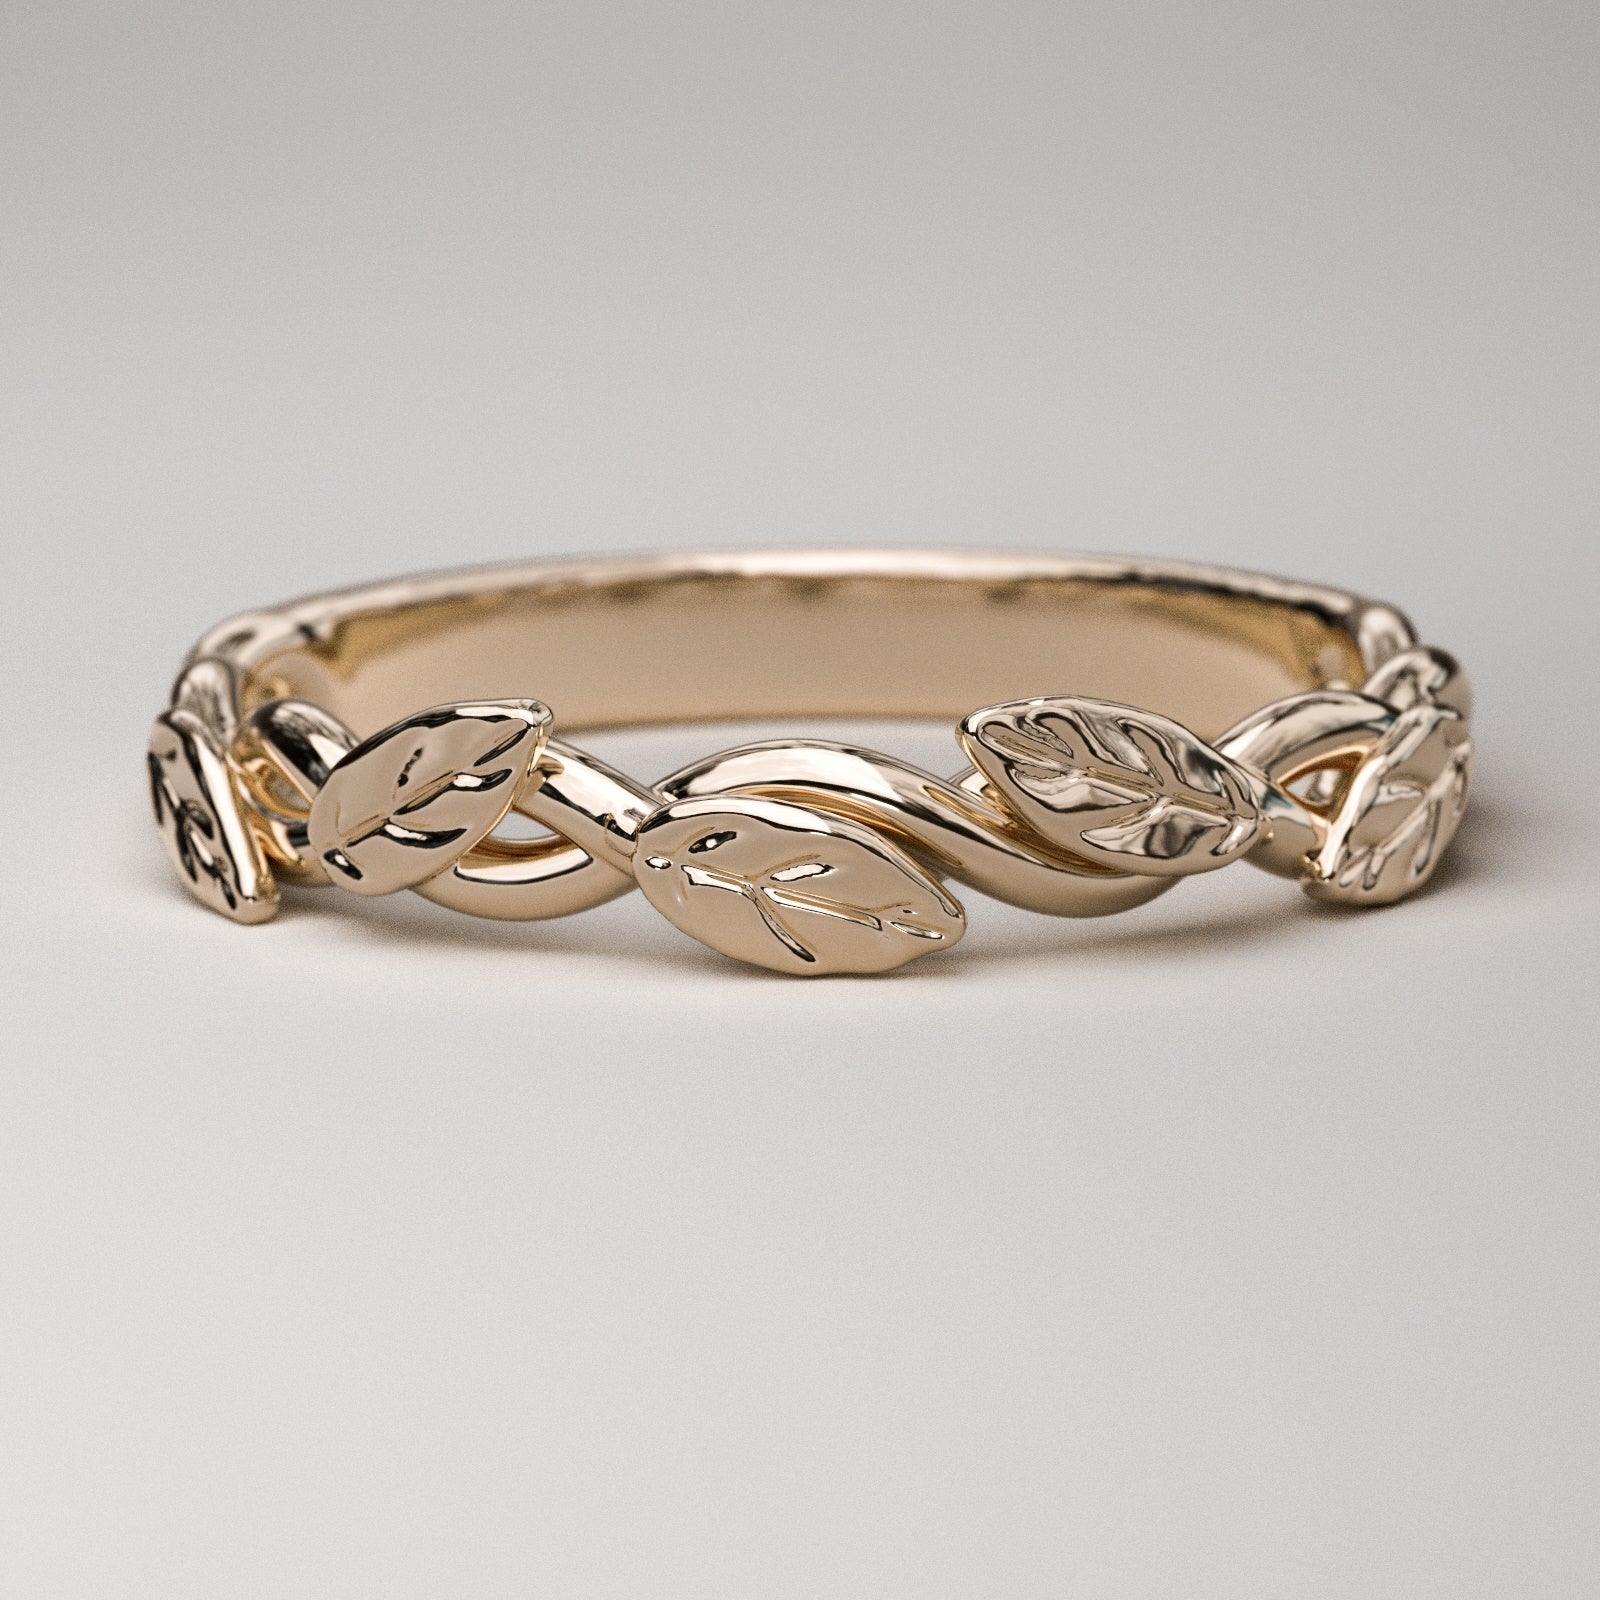 intertwined vine ring with leaves in solid rose gold